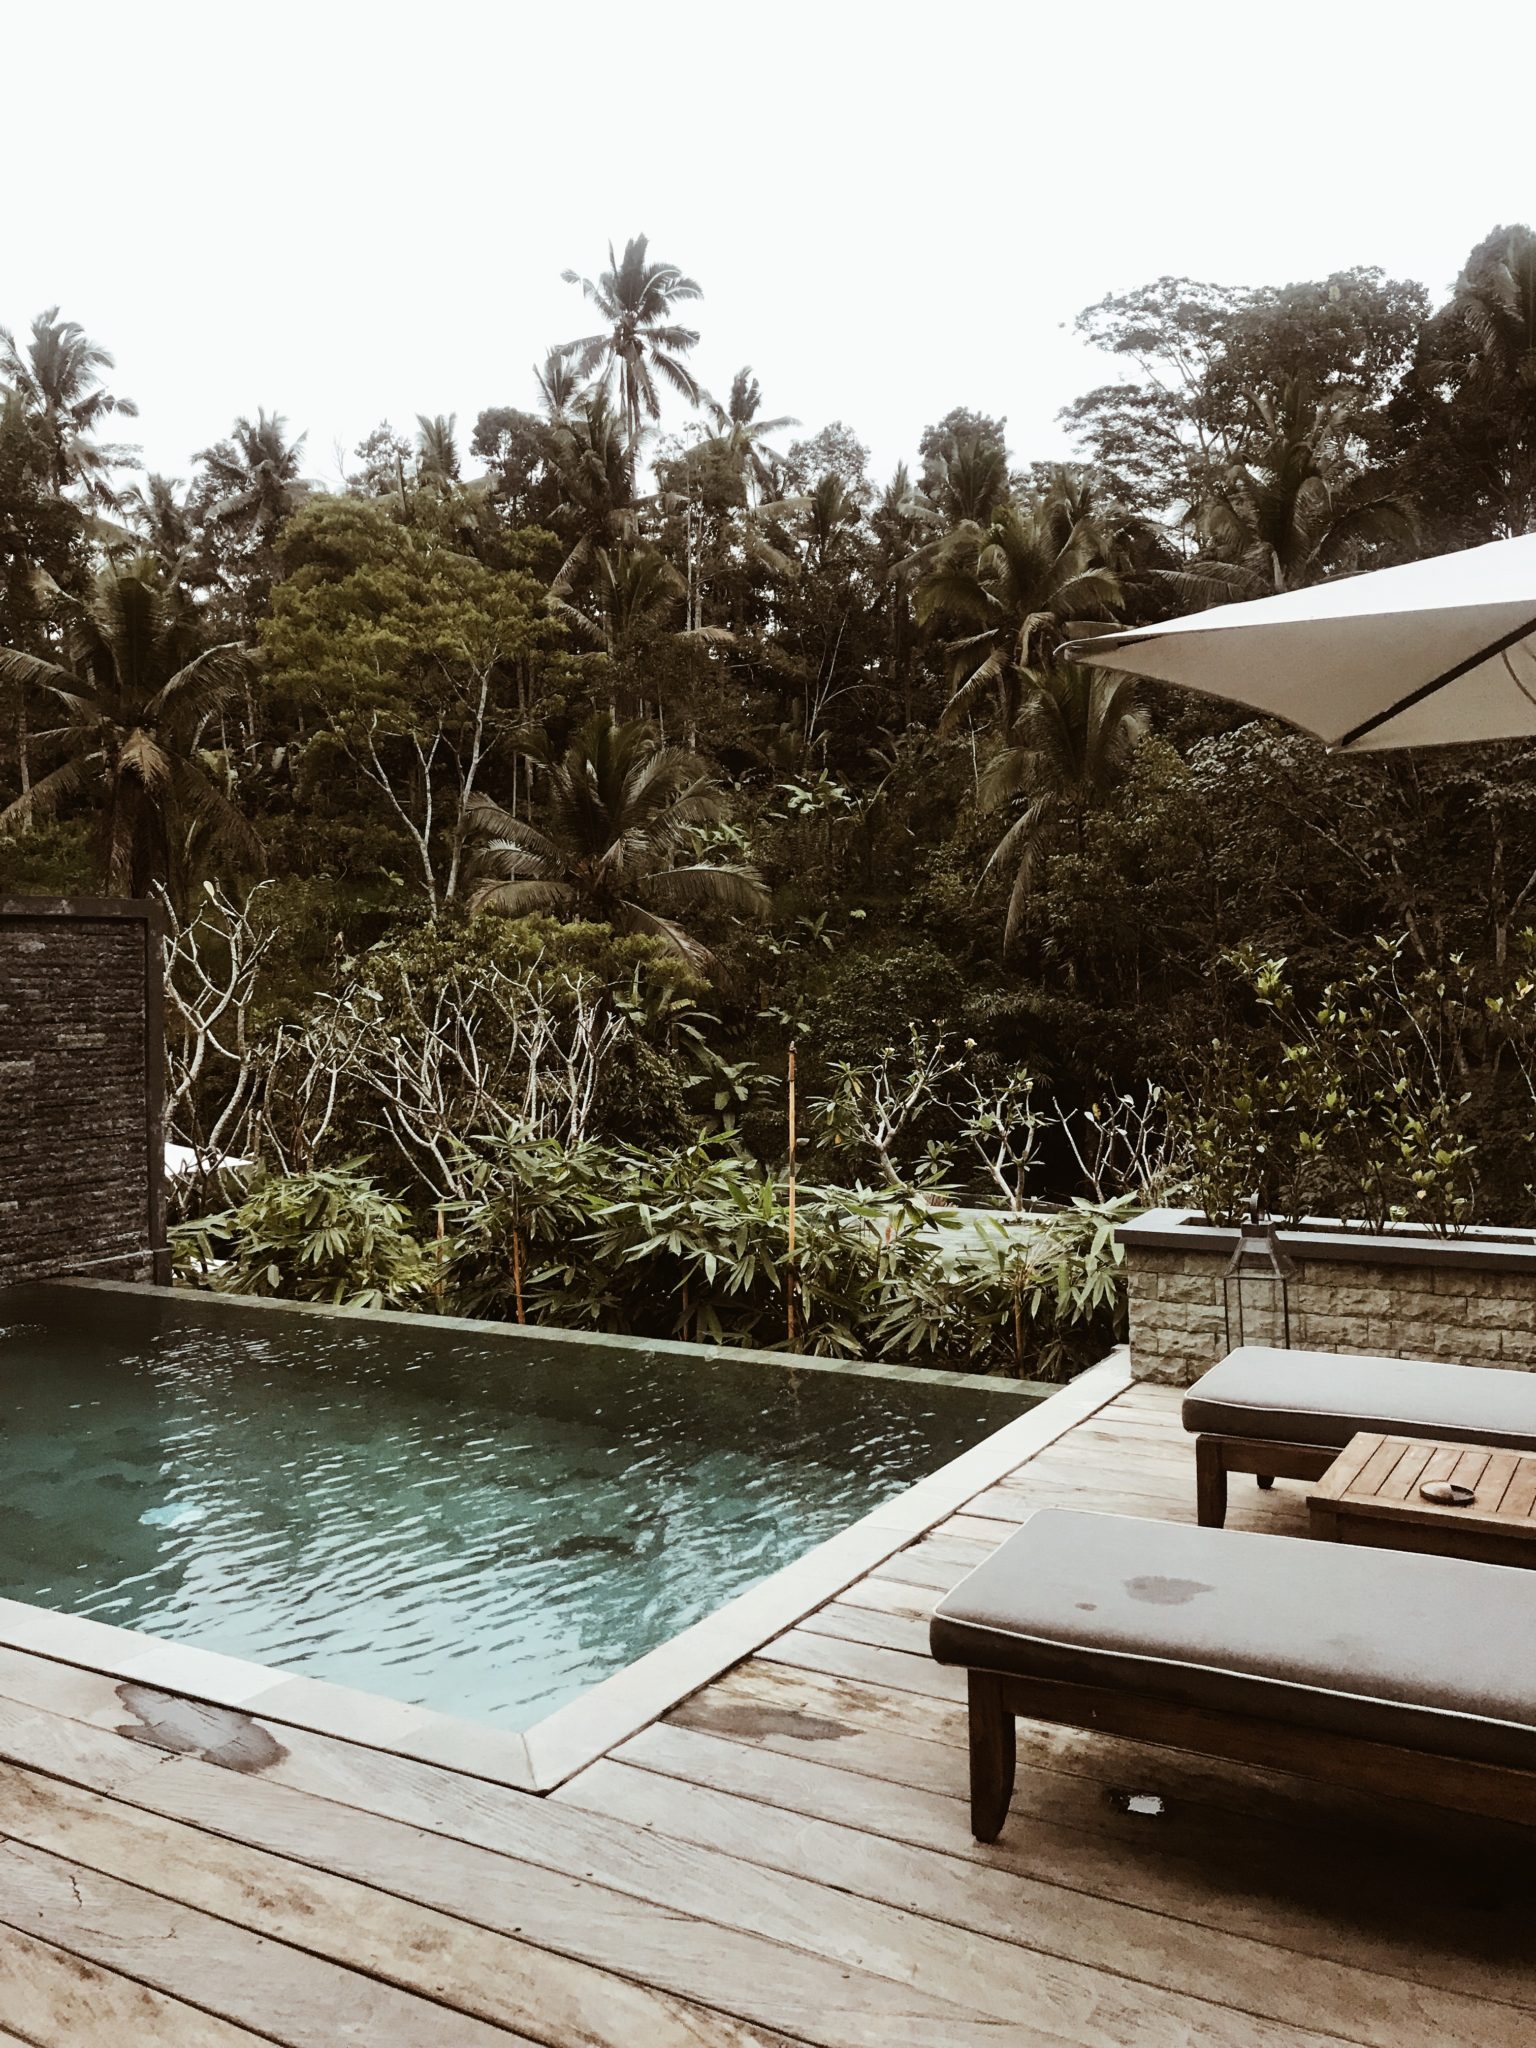 Where to Stay in Bali